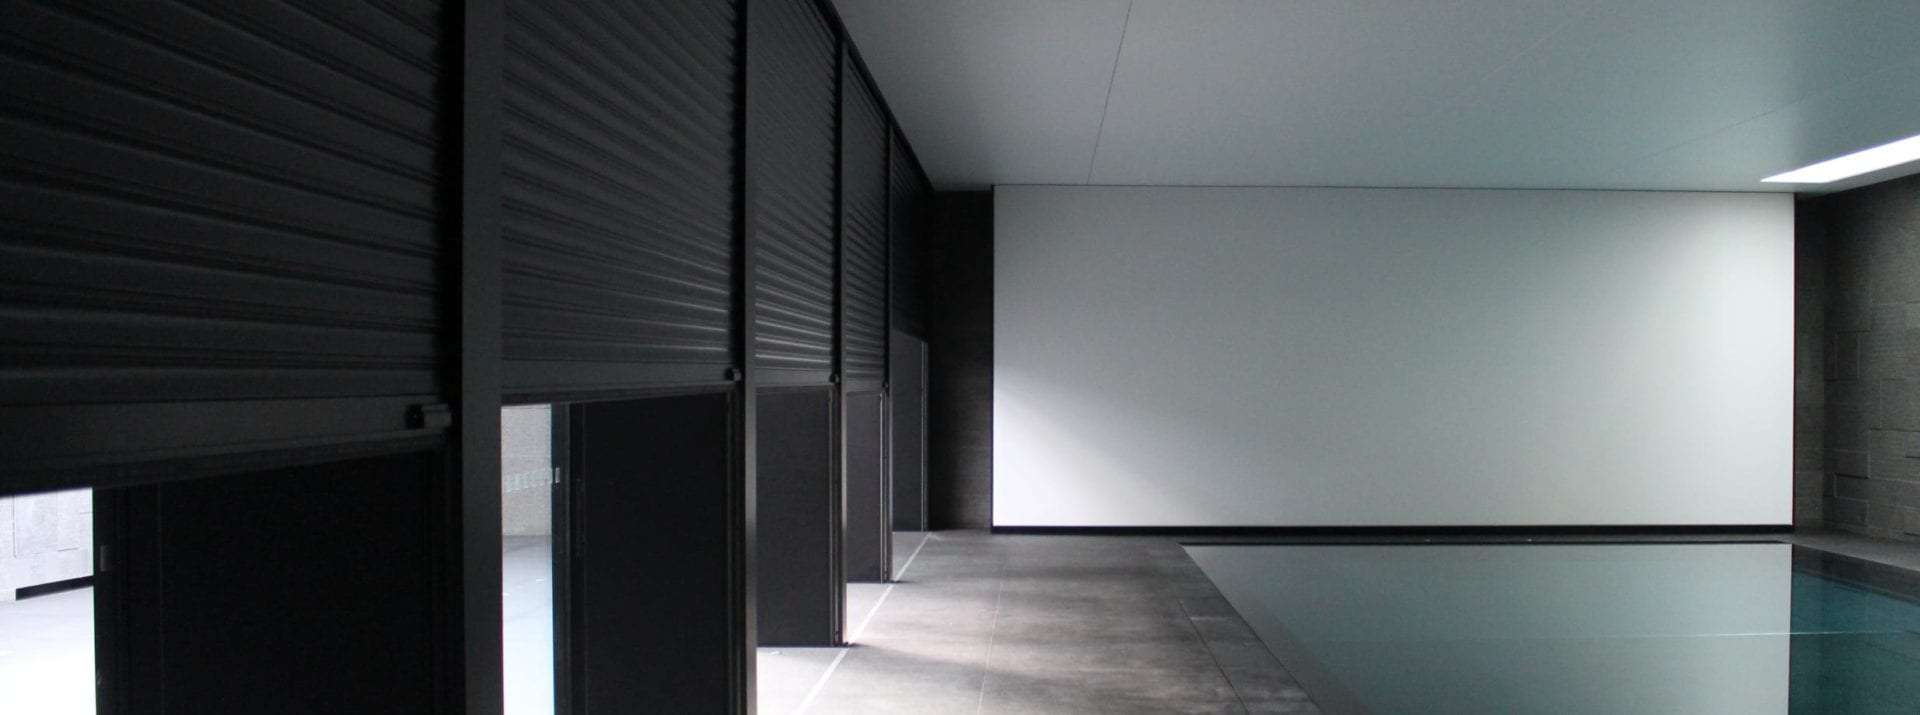 Equilux Built-In Shutters